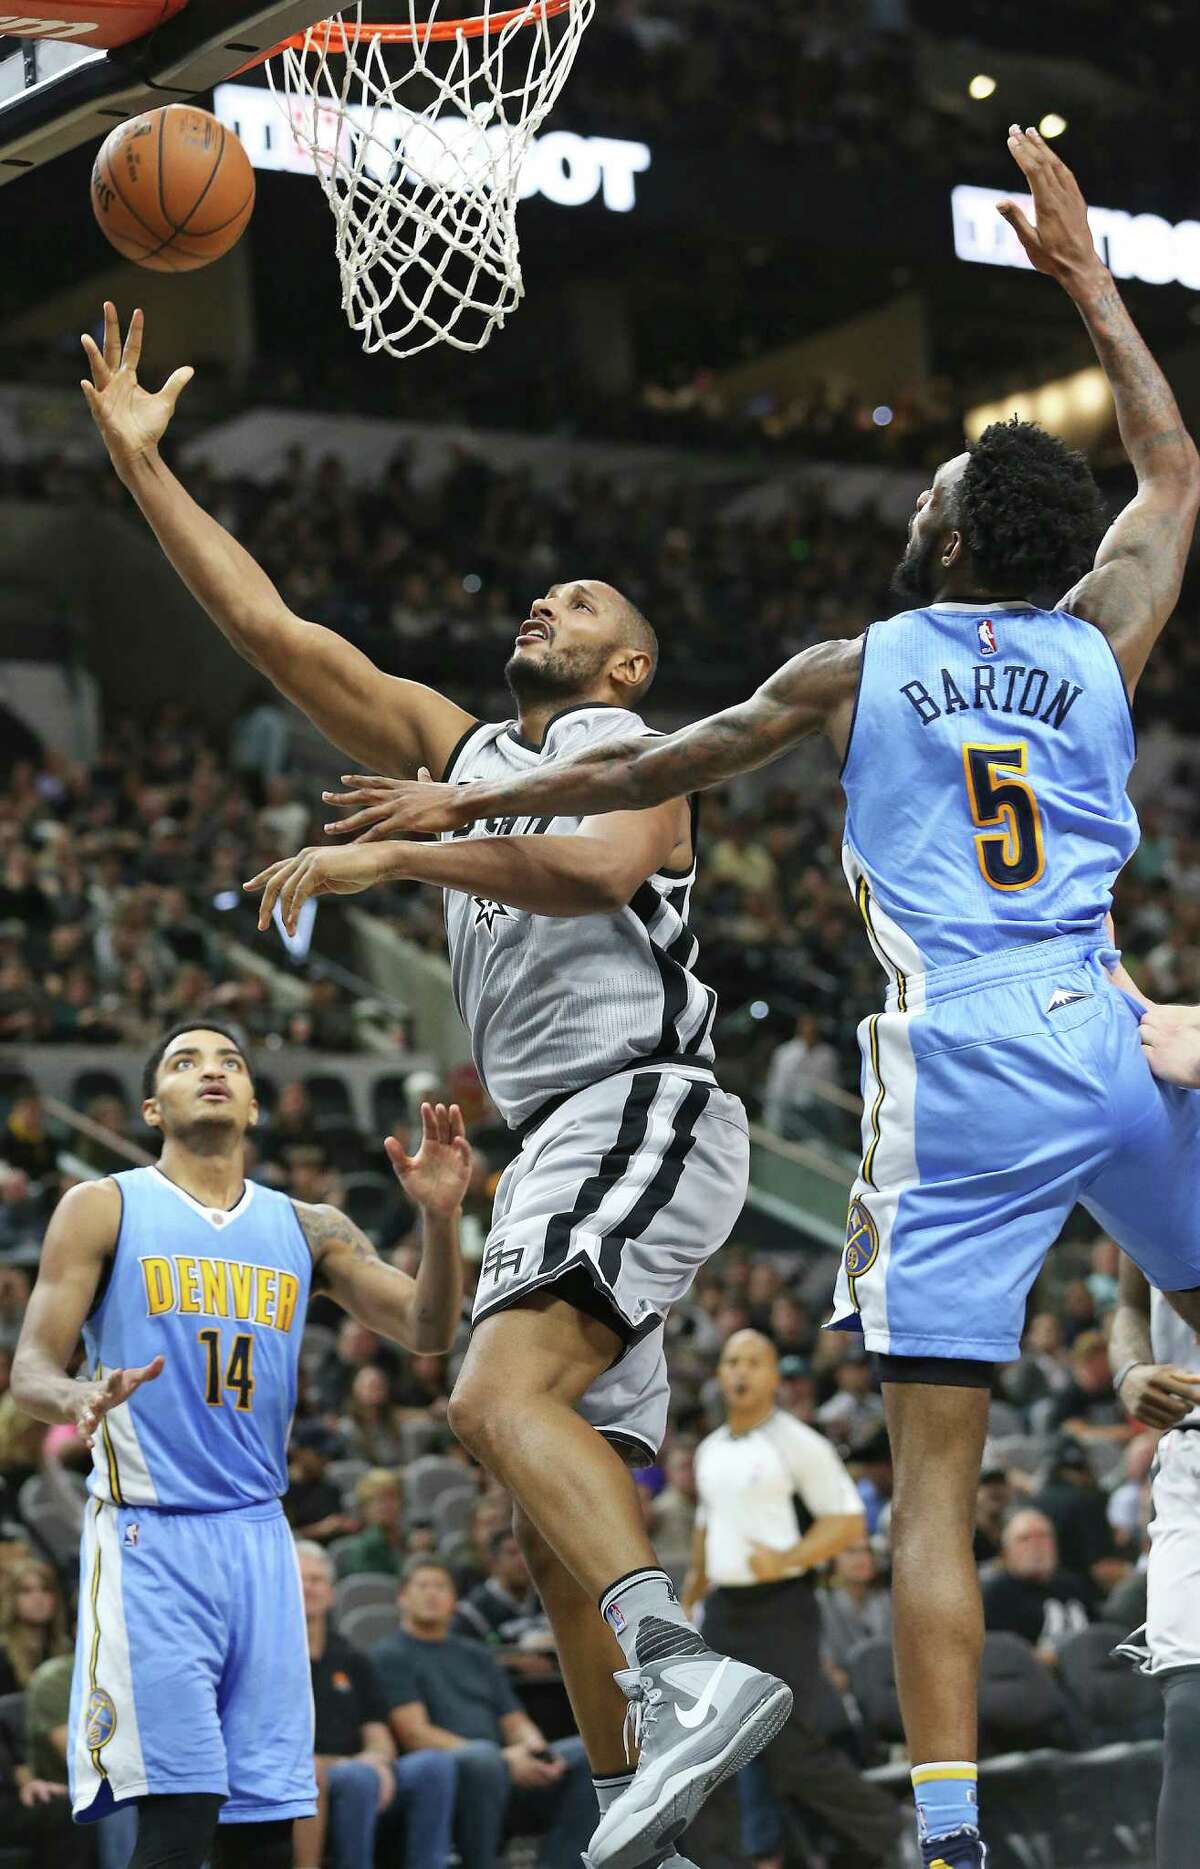 Boris Diaw floats through to get a running layup between Gary Harris (14) and Will Barton as the Spurs host the Denver Nuggets at the AT&T Center on Dec. 27, 2015.